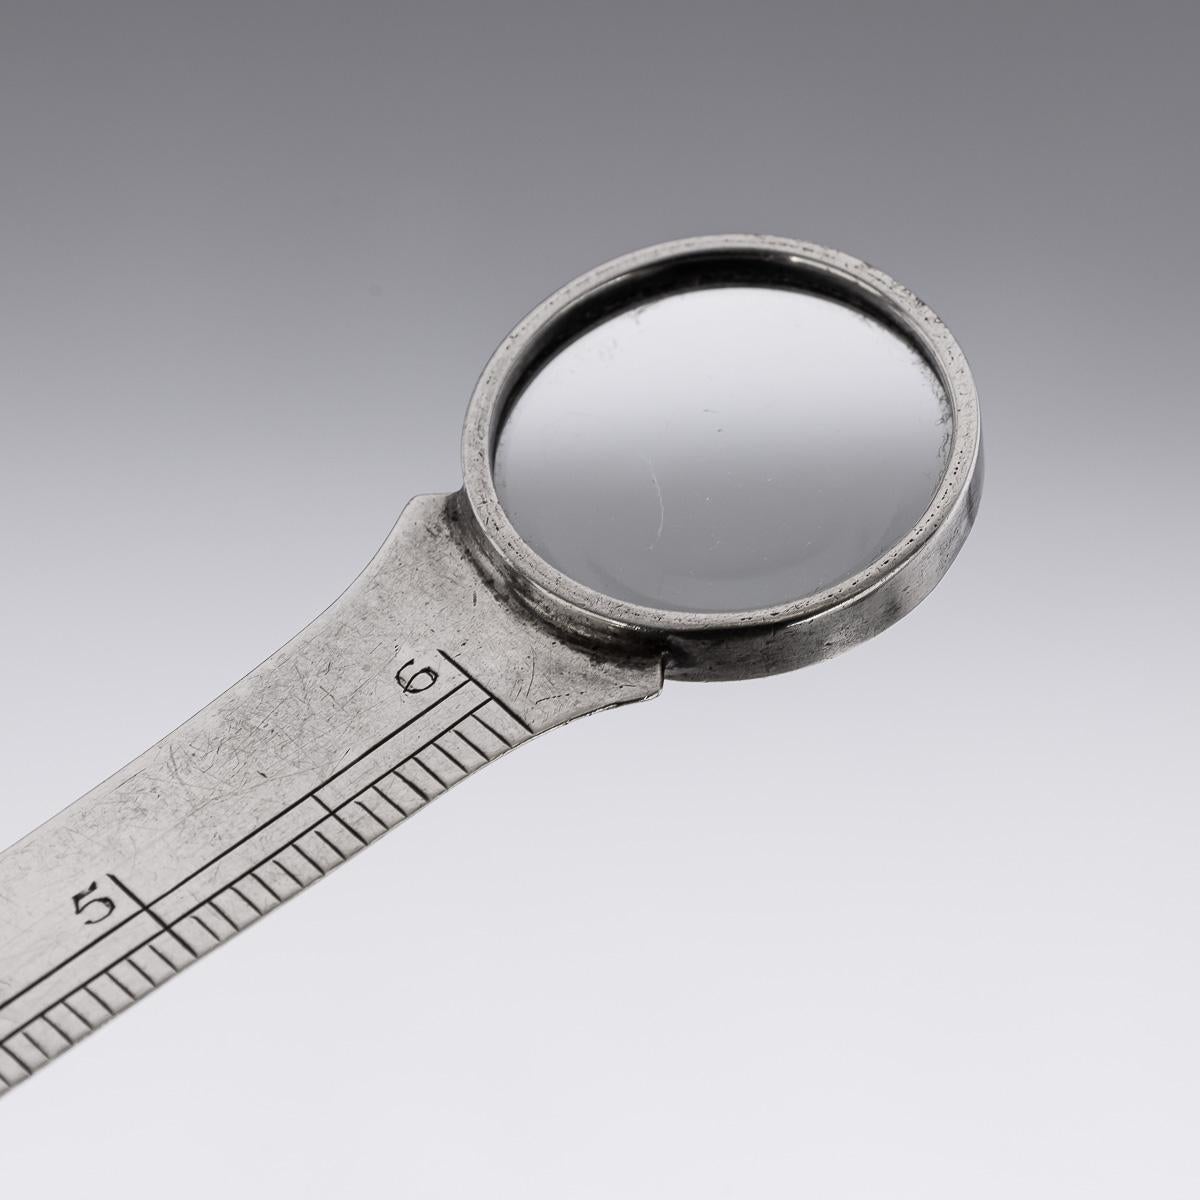 20th Century British Solid Silver Magnifying Glass & Ruler, Asprey, c.1929 In Good Condition For Sale In Royal Tunbridge Wells, Kent